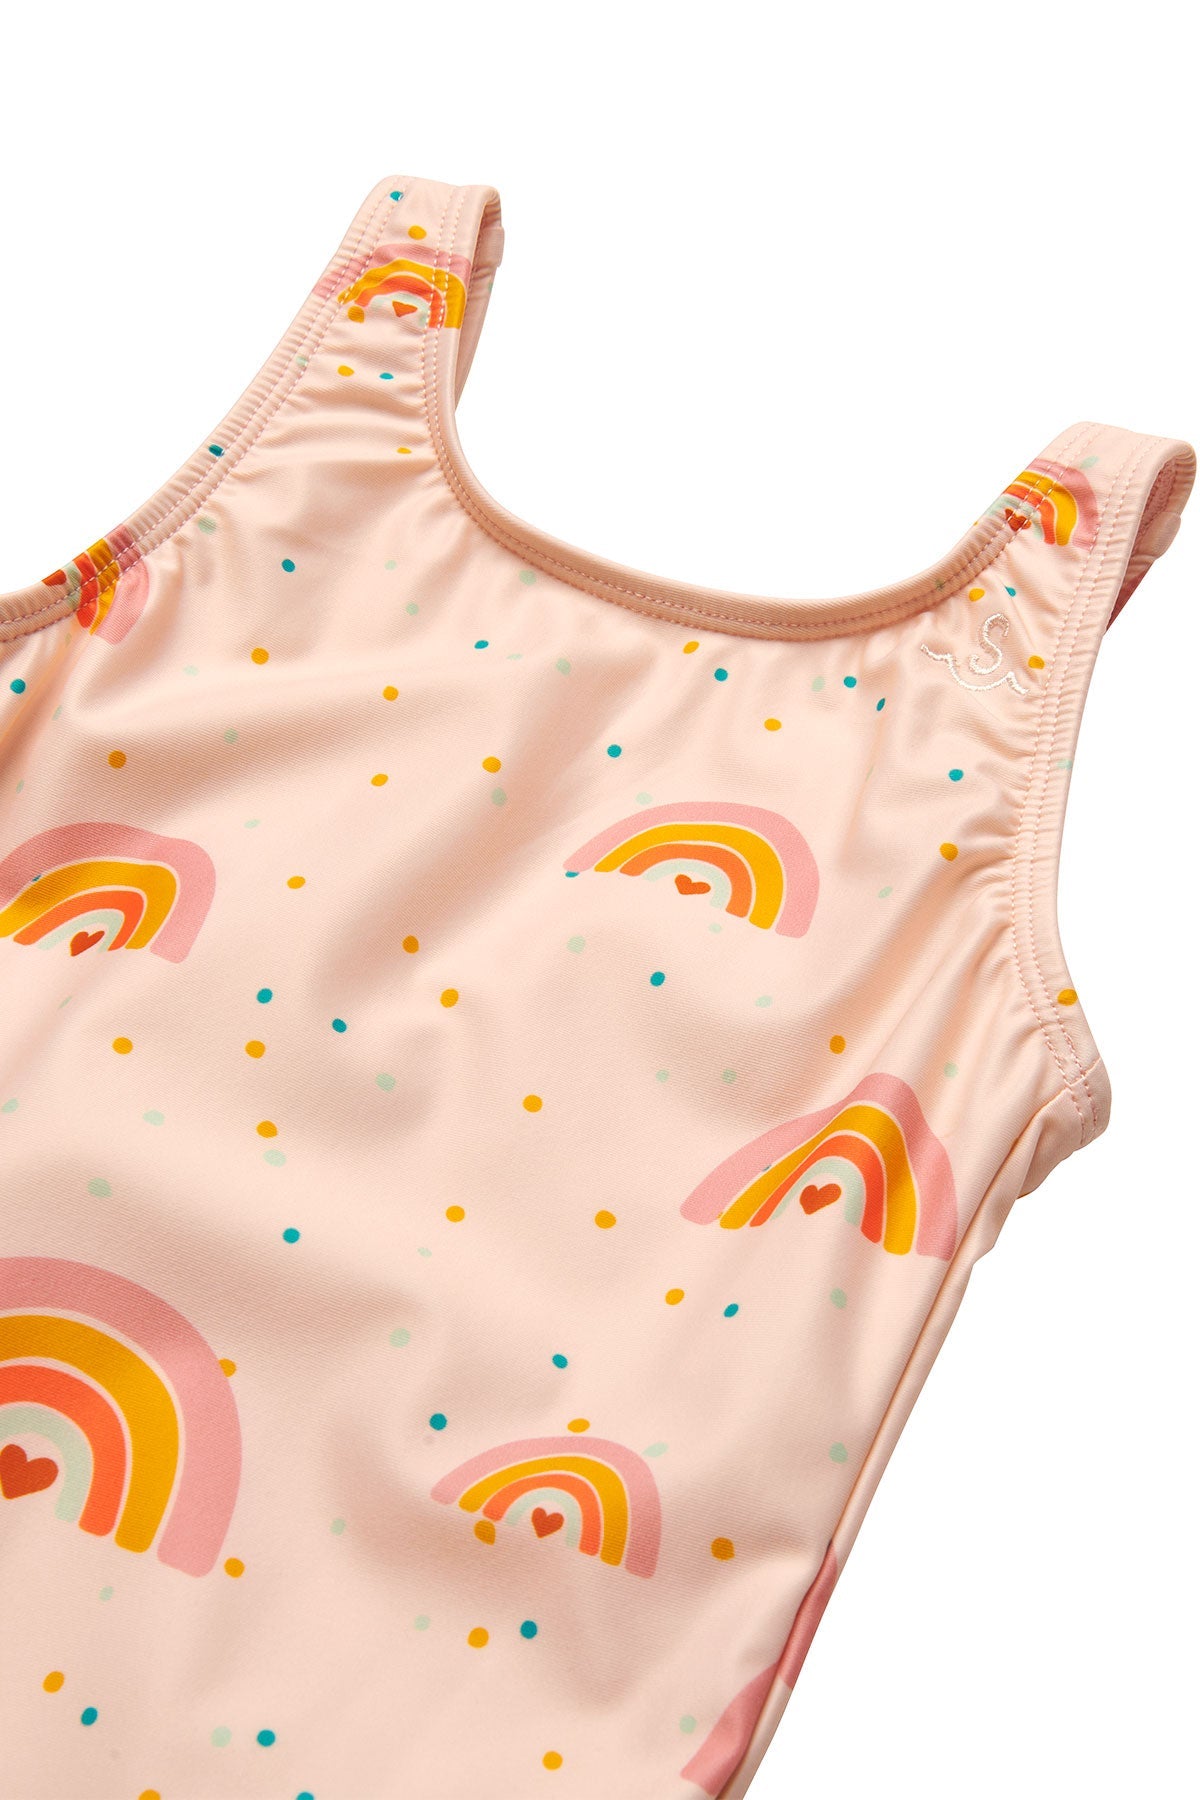 Custom rainbow print made exclusively for Seaesta Surf with a base color in a beautiful pastel pink. Seaesta Surf kids swimsuits are earth and performance conscious, featuring eco-friendly fabrics and a full coverage that stays in place while your little one plays.